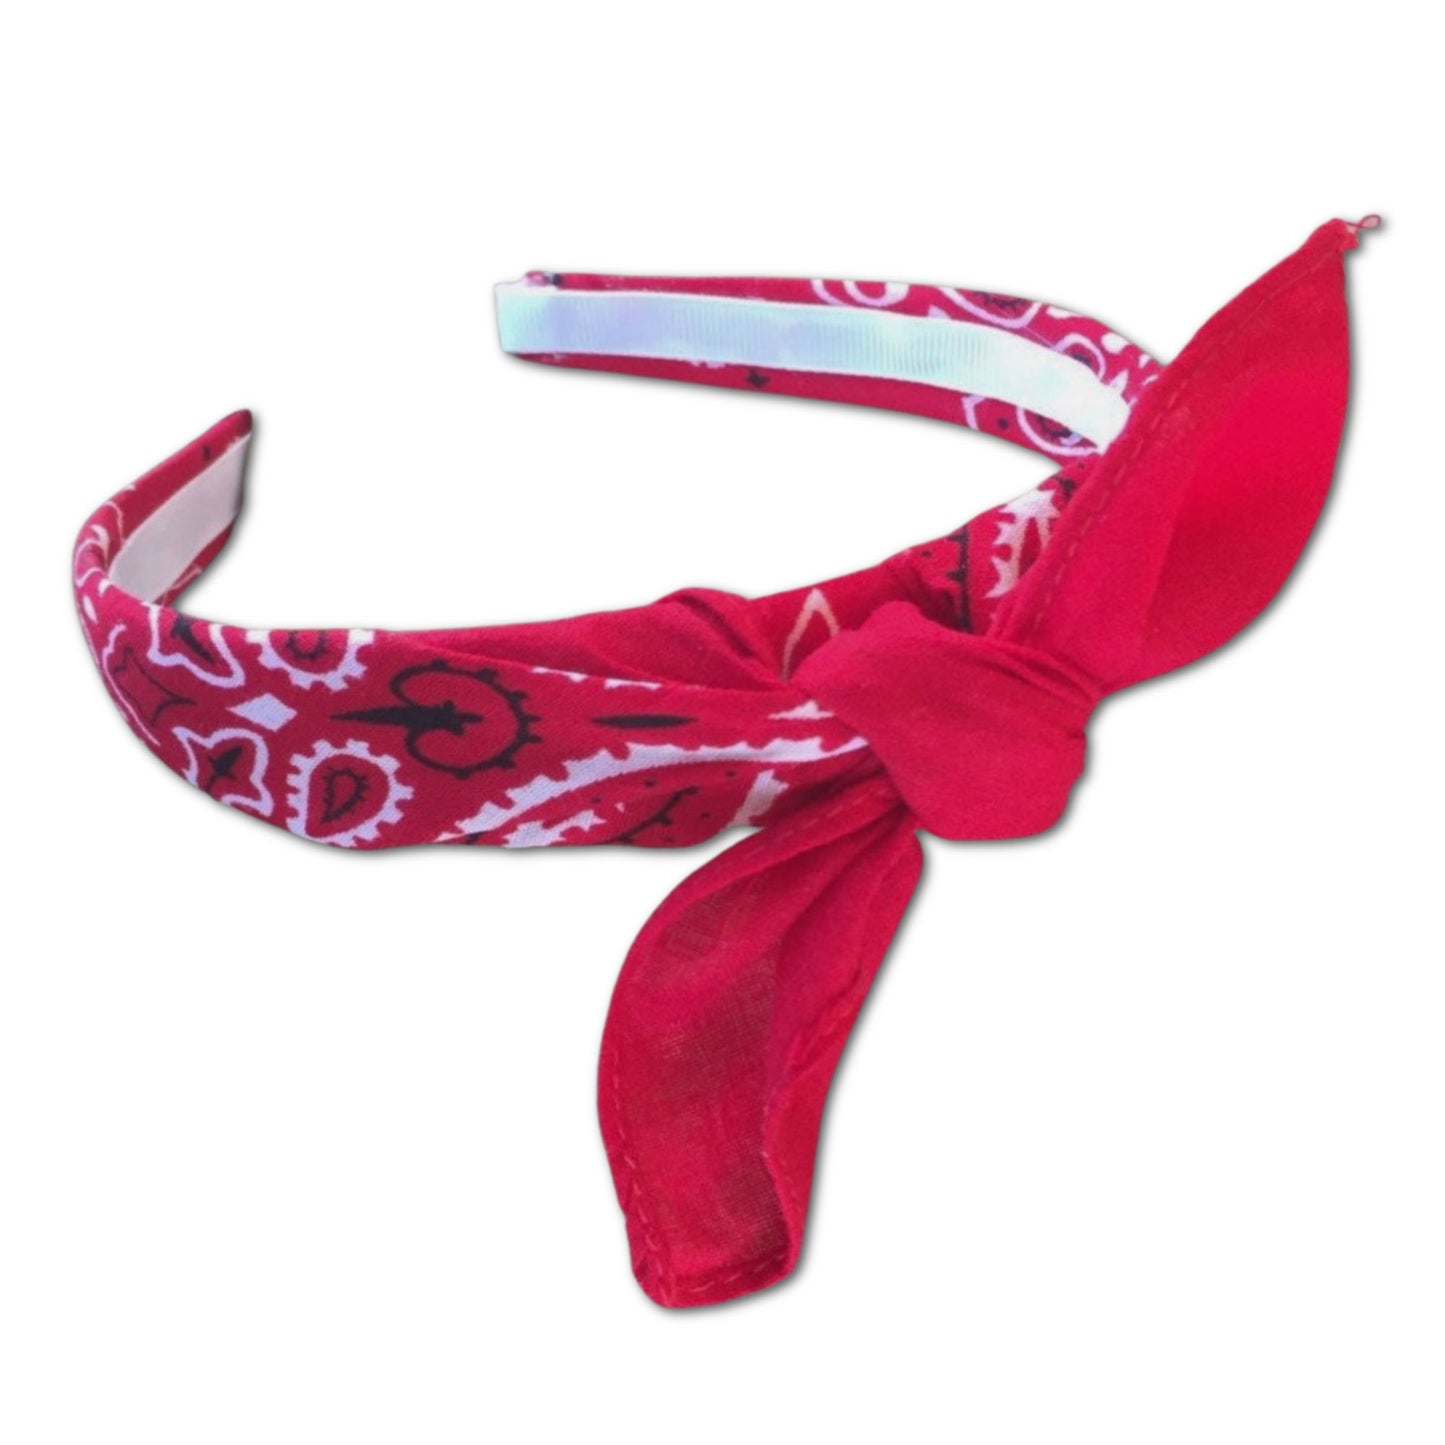 Red paisley kerchief bandana wrapped around plastic headband and tied in a knot